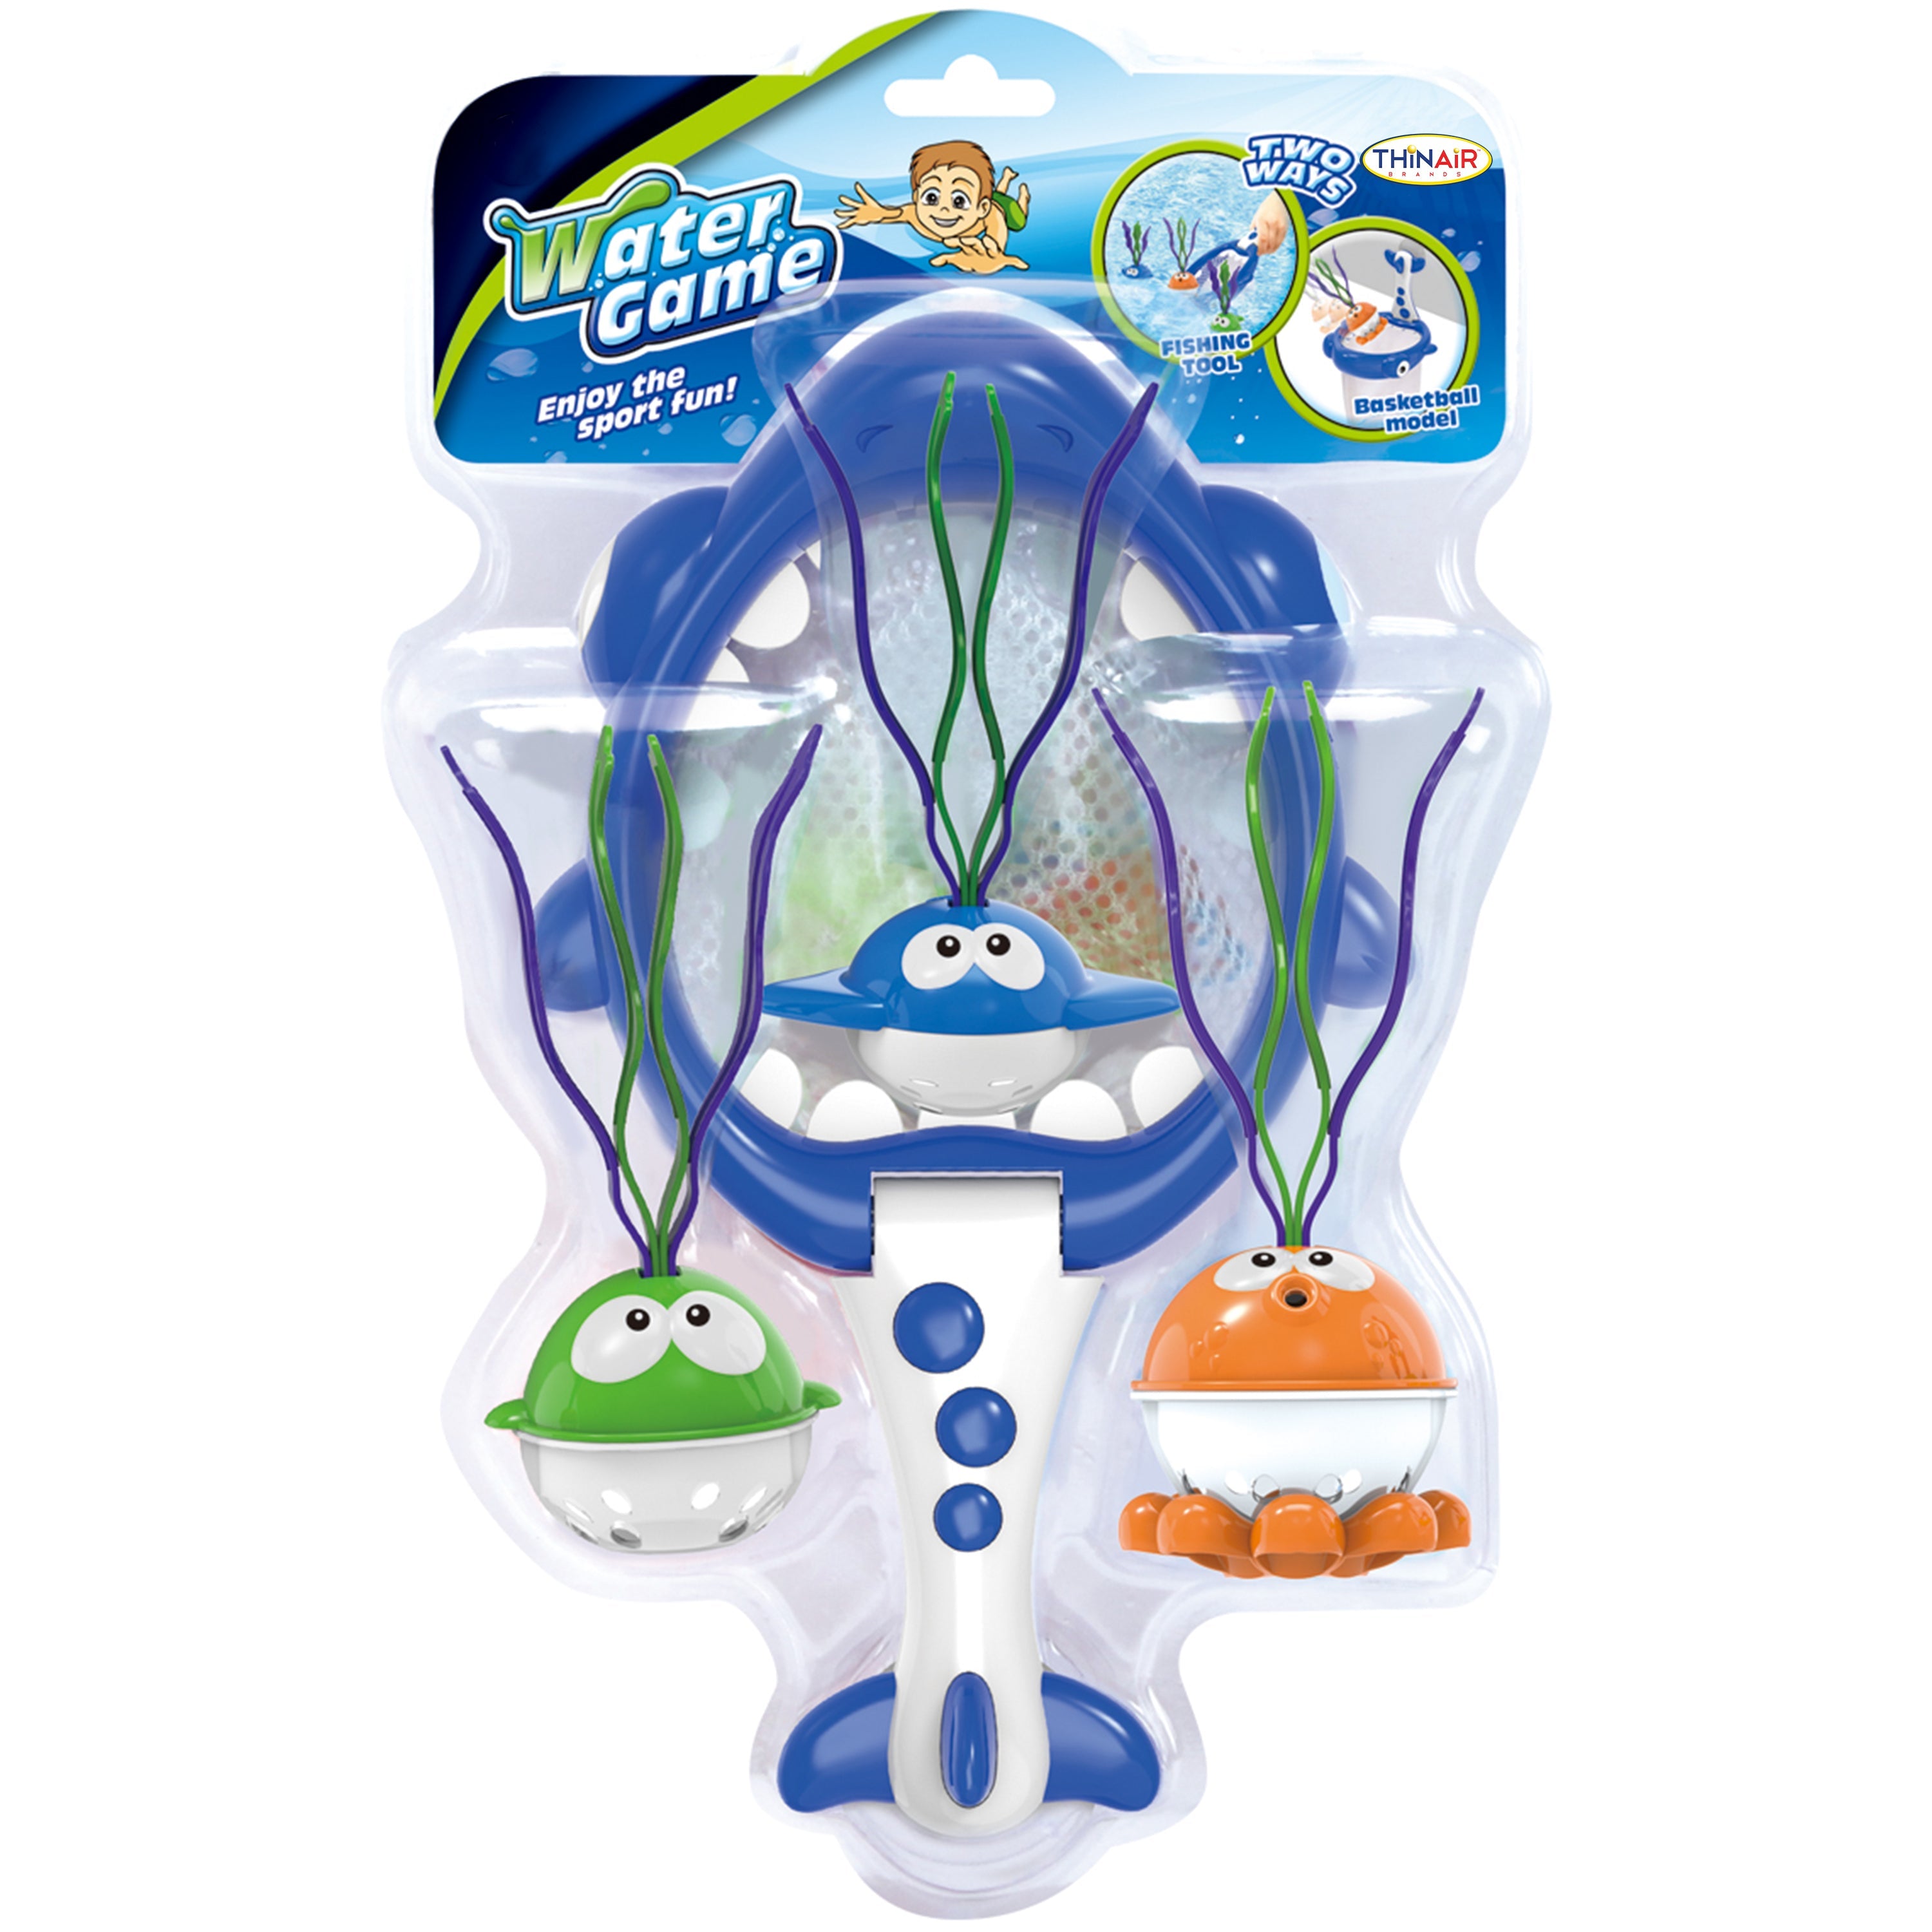 Net The Fish Swim Toy by Thin Air #W569